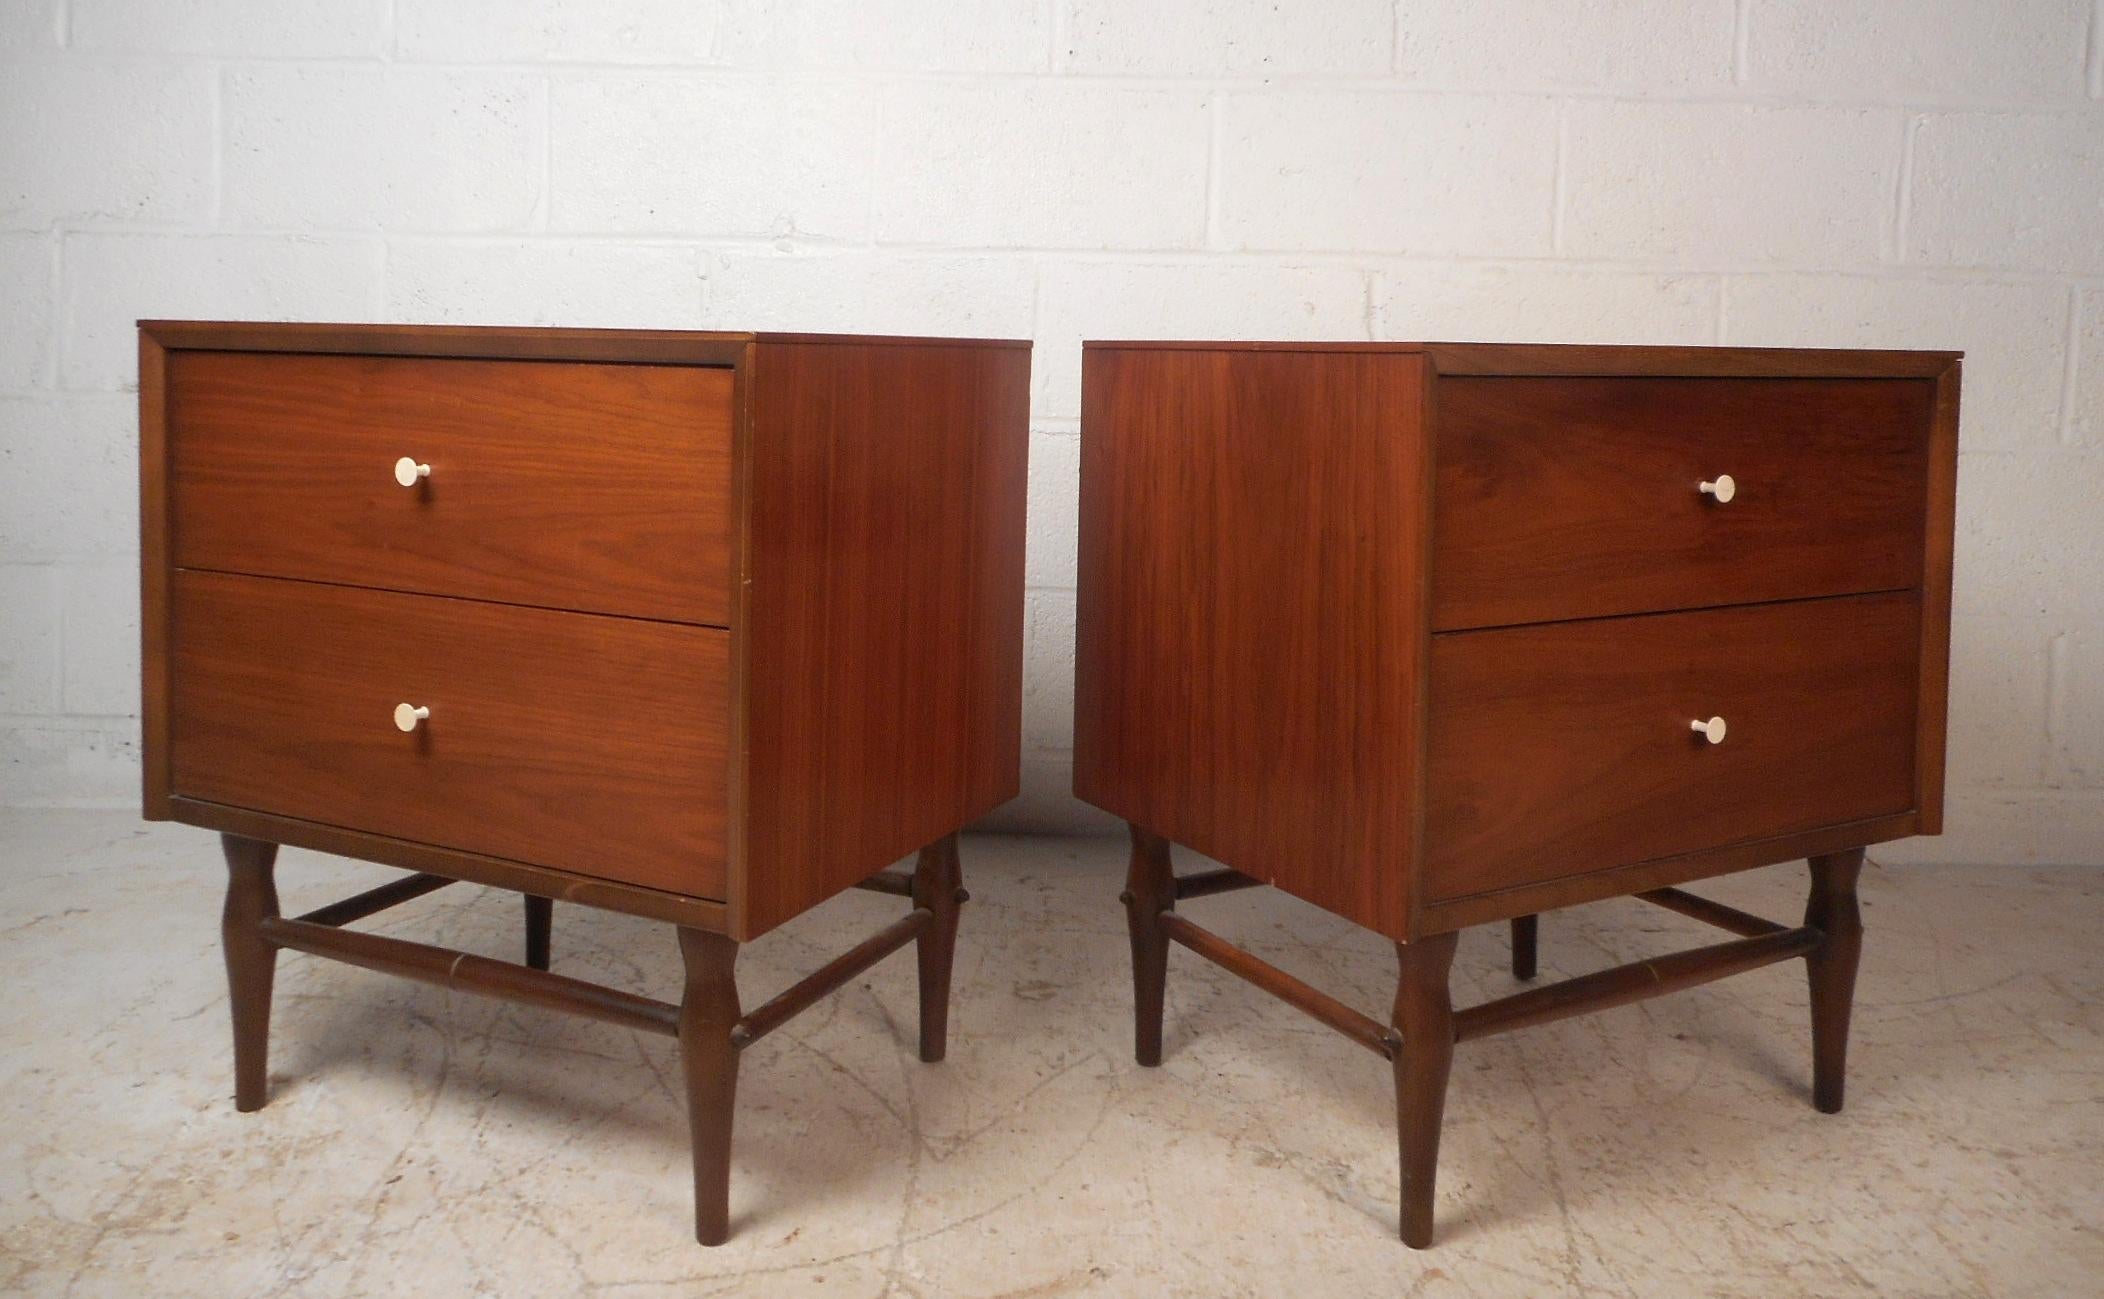 This stunning pair of vintage modern nightstands feature two large drawers with white circular pulls. The sleek design has sculpted and tapered legs with stretchers running all the way around. This stylish and sturdy pair of midcentury end tables